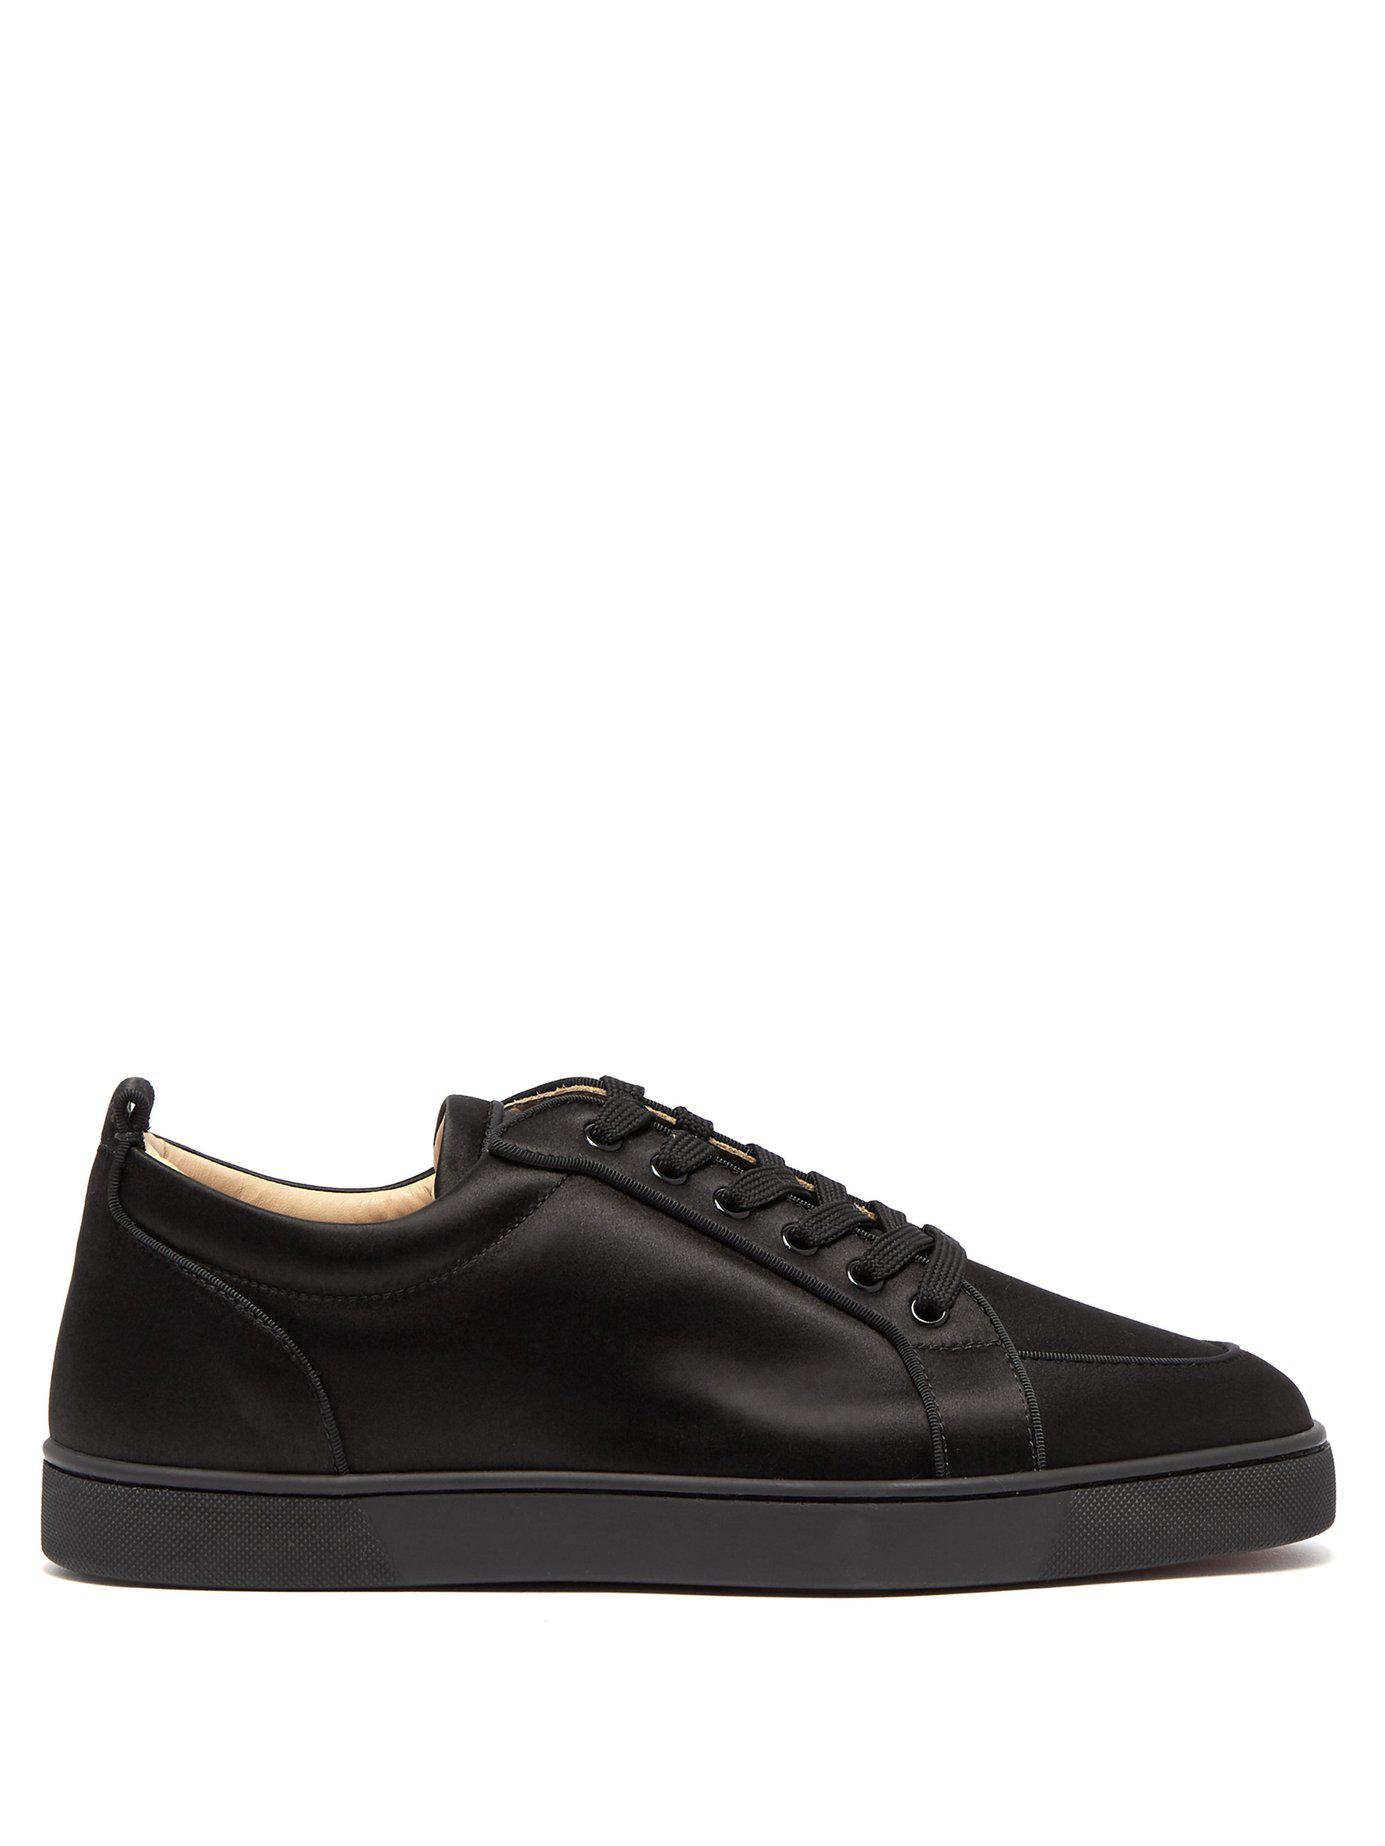 Christian Louboutin Rantulow Satin Low-top Trainers in Black for Men - Lyst